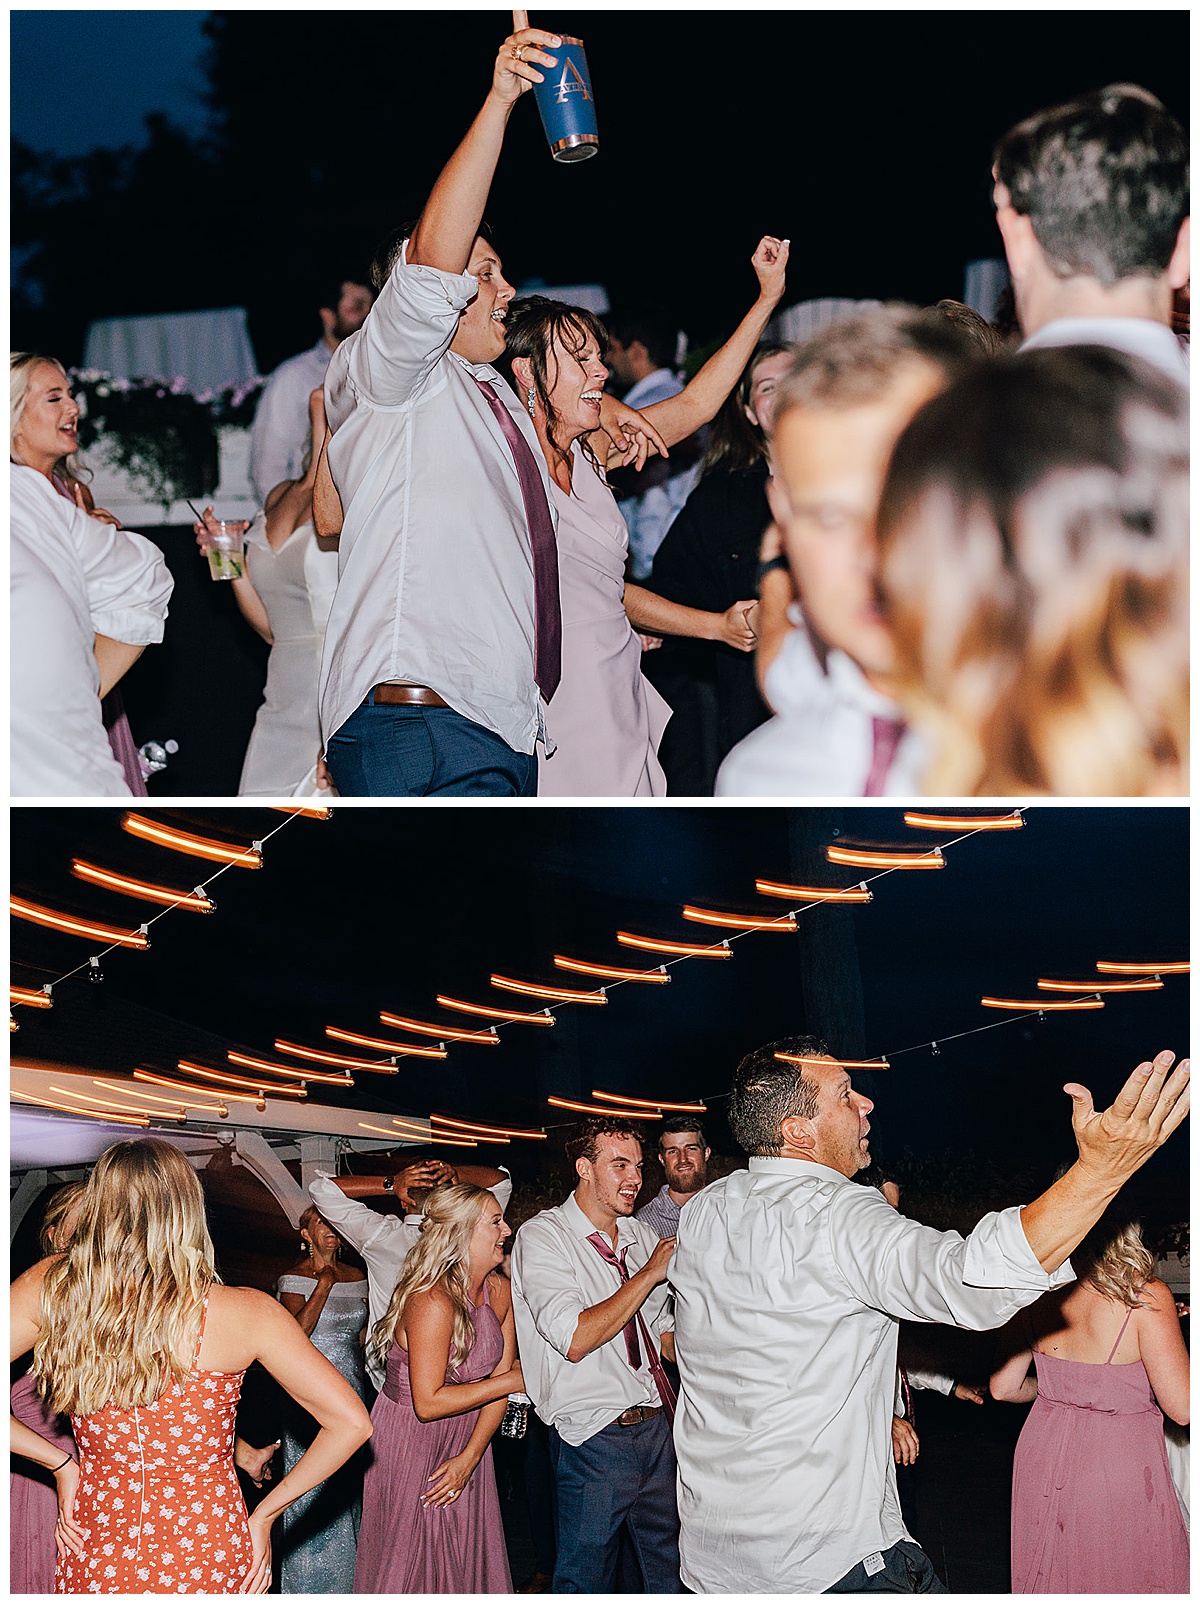 Family and friends dancing all night by Kayla Bouren Photography